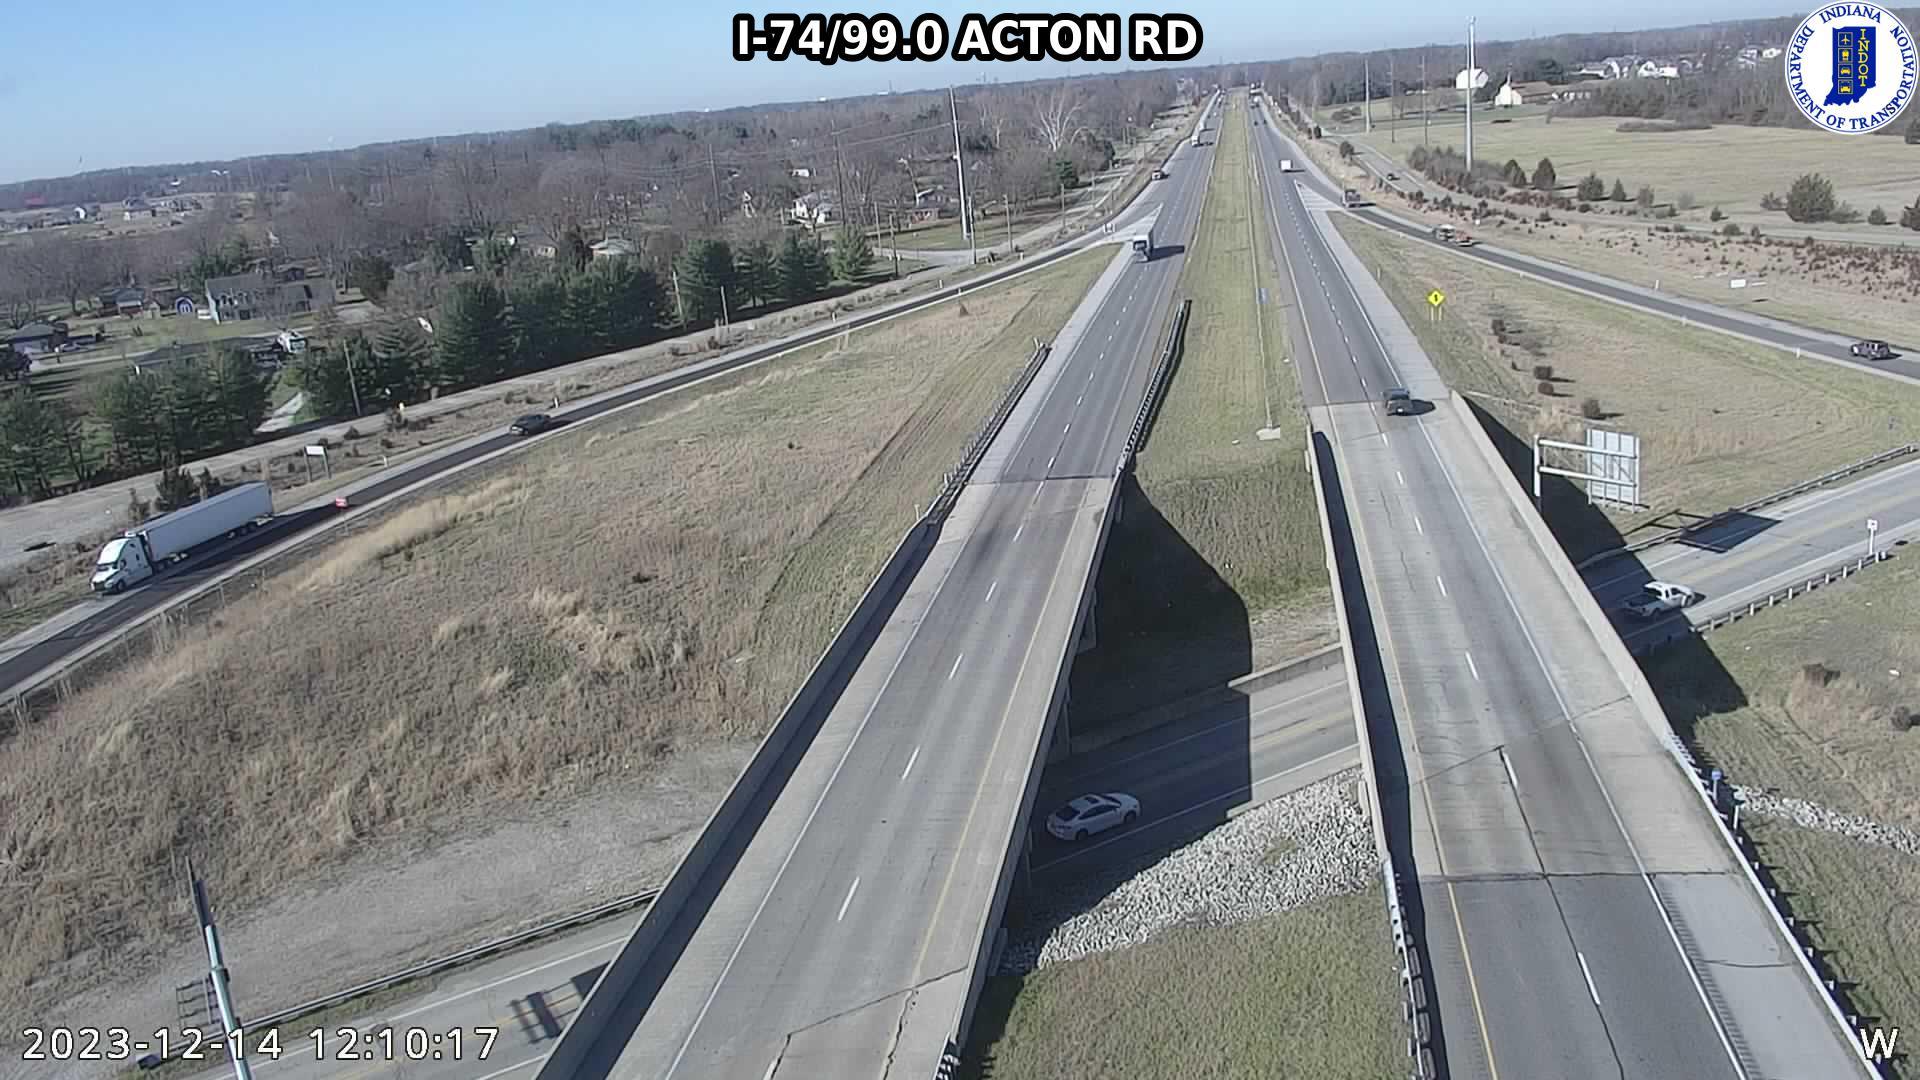 Traffic Cam Indianapolis: I-74: I-74/99.0 ACTON RD Player